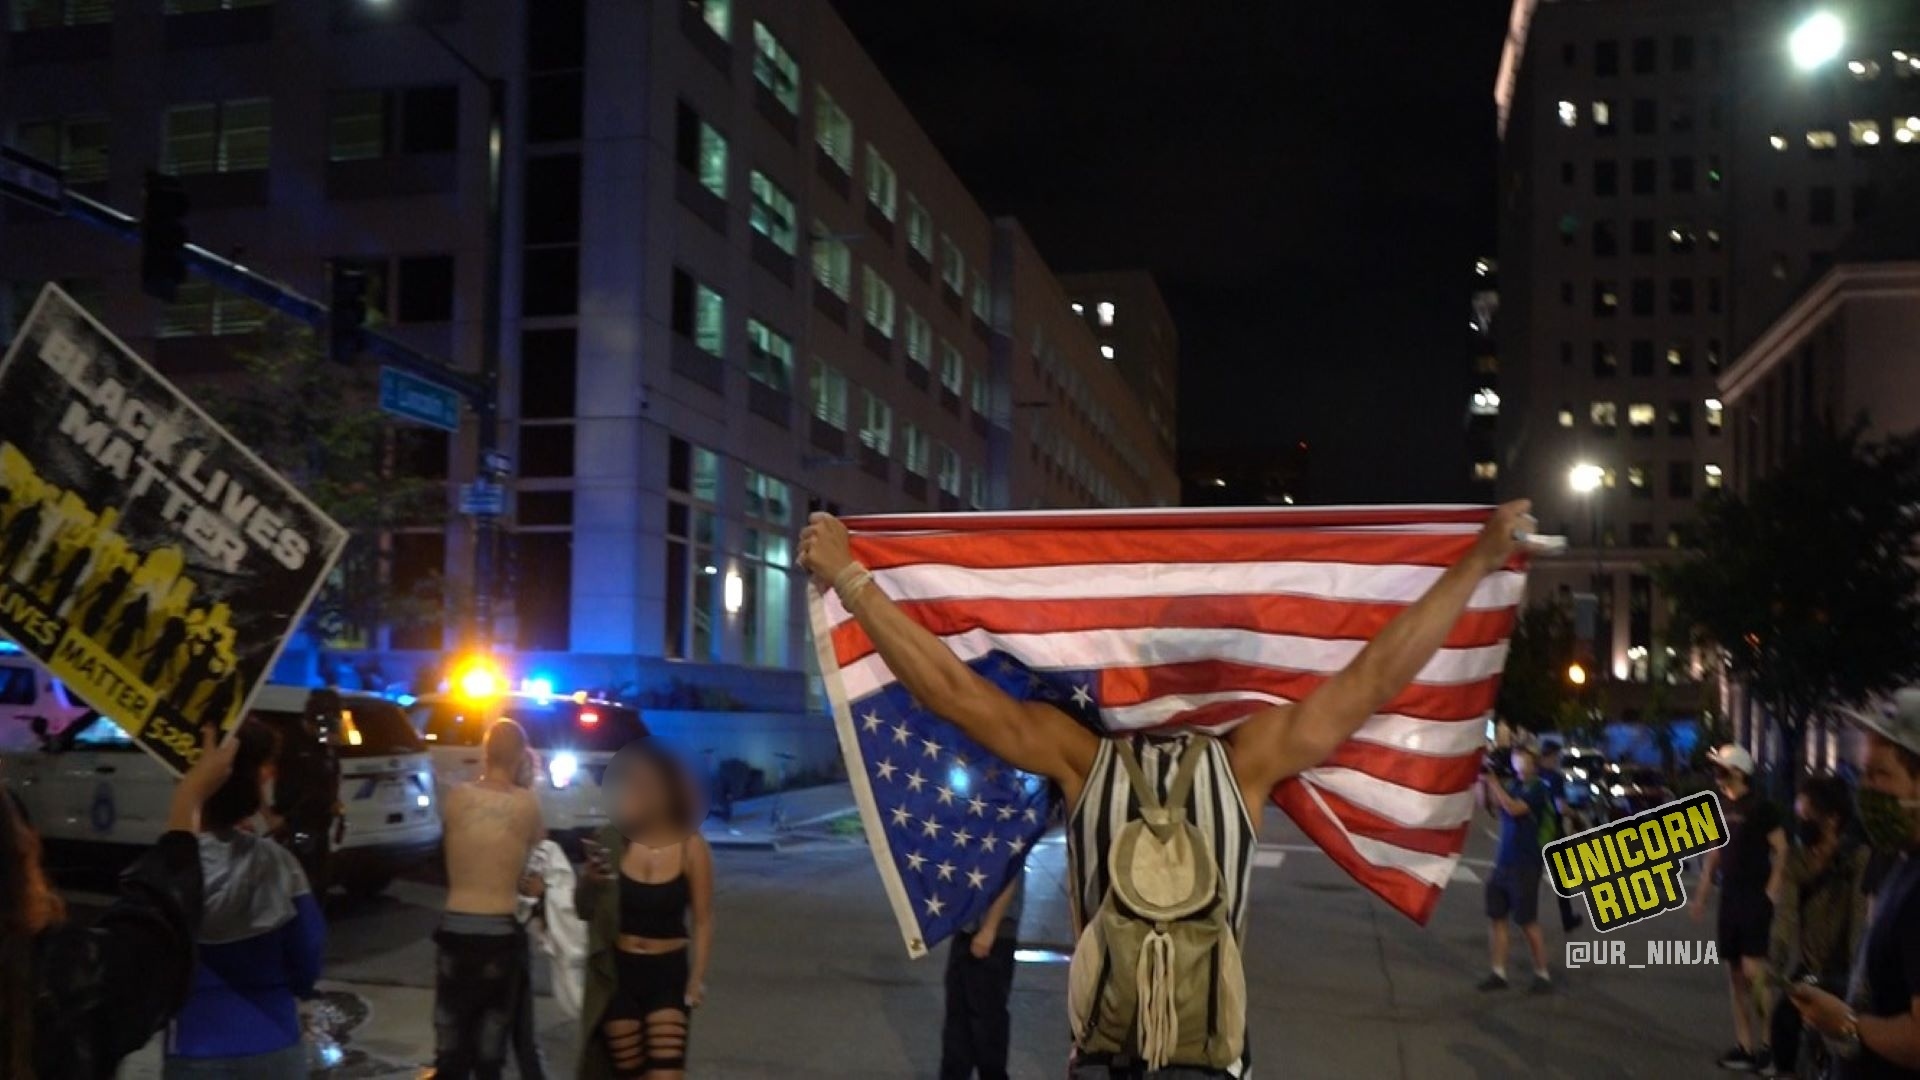 Denver Police Served Temporary Restraining Order Amid Nationwide Protest Repression